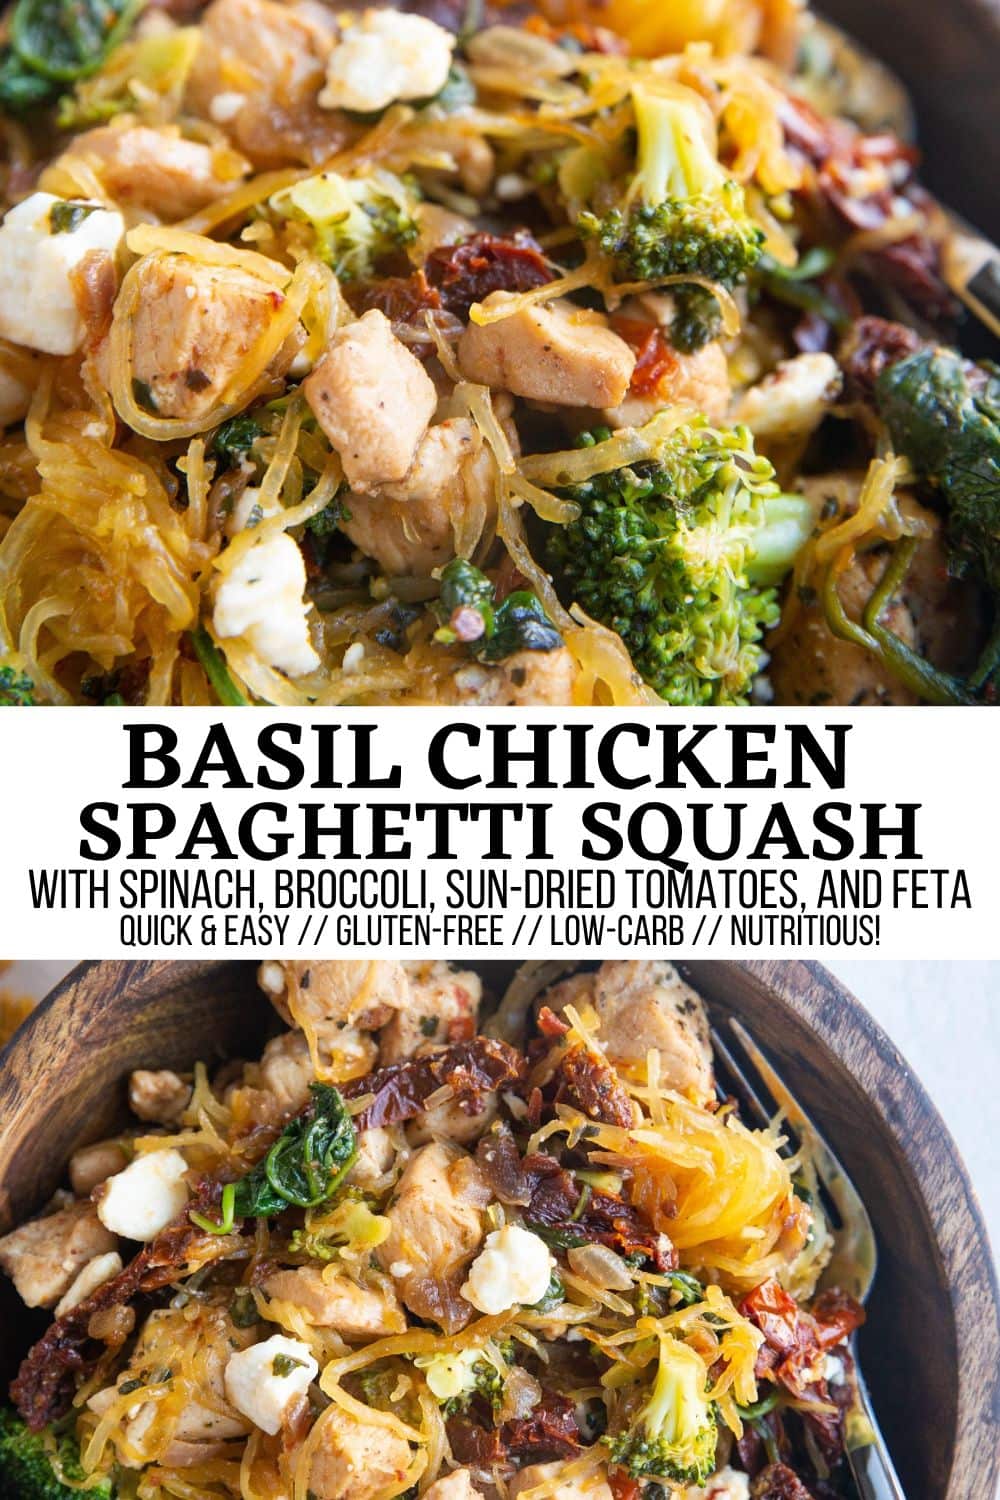 Collage for Pinterest for basil chicken spaghetti squash.